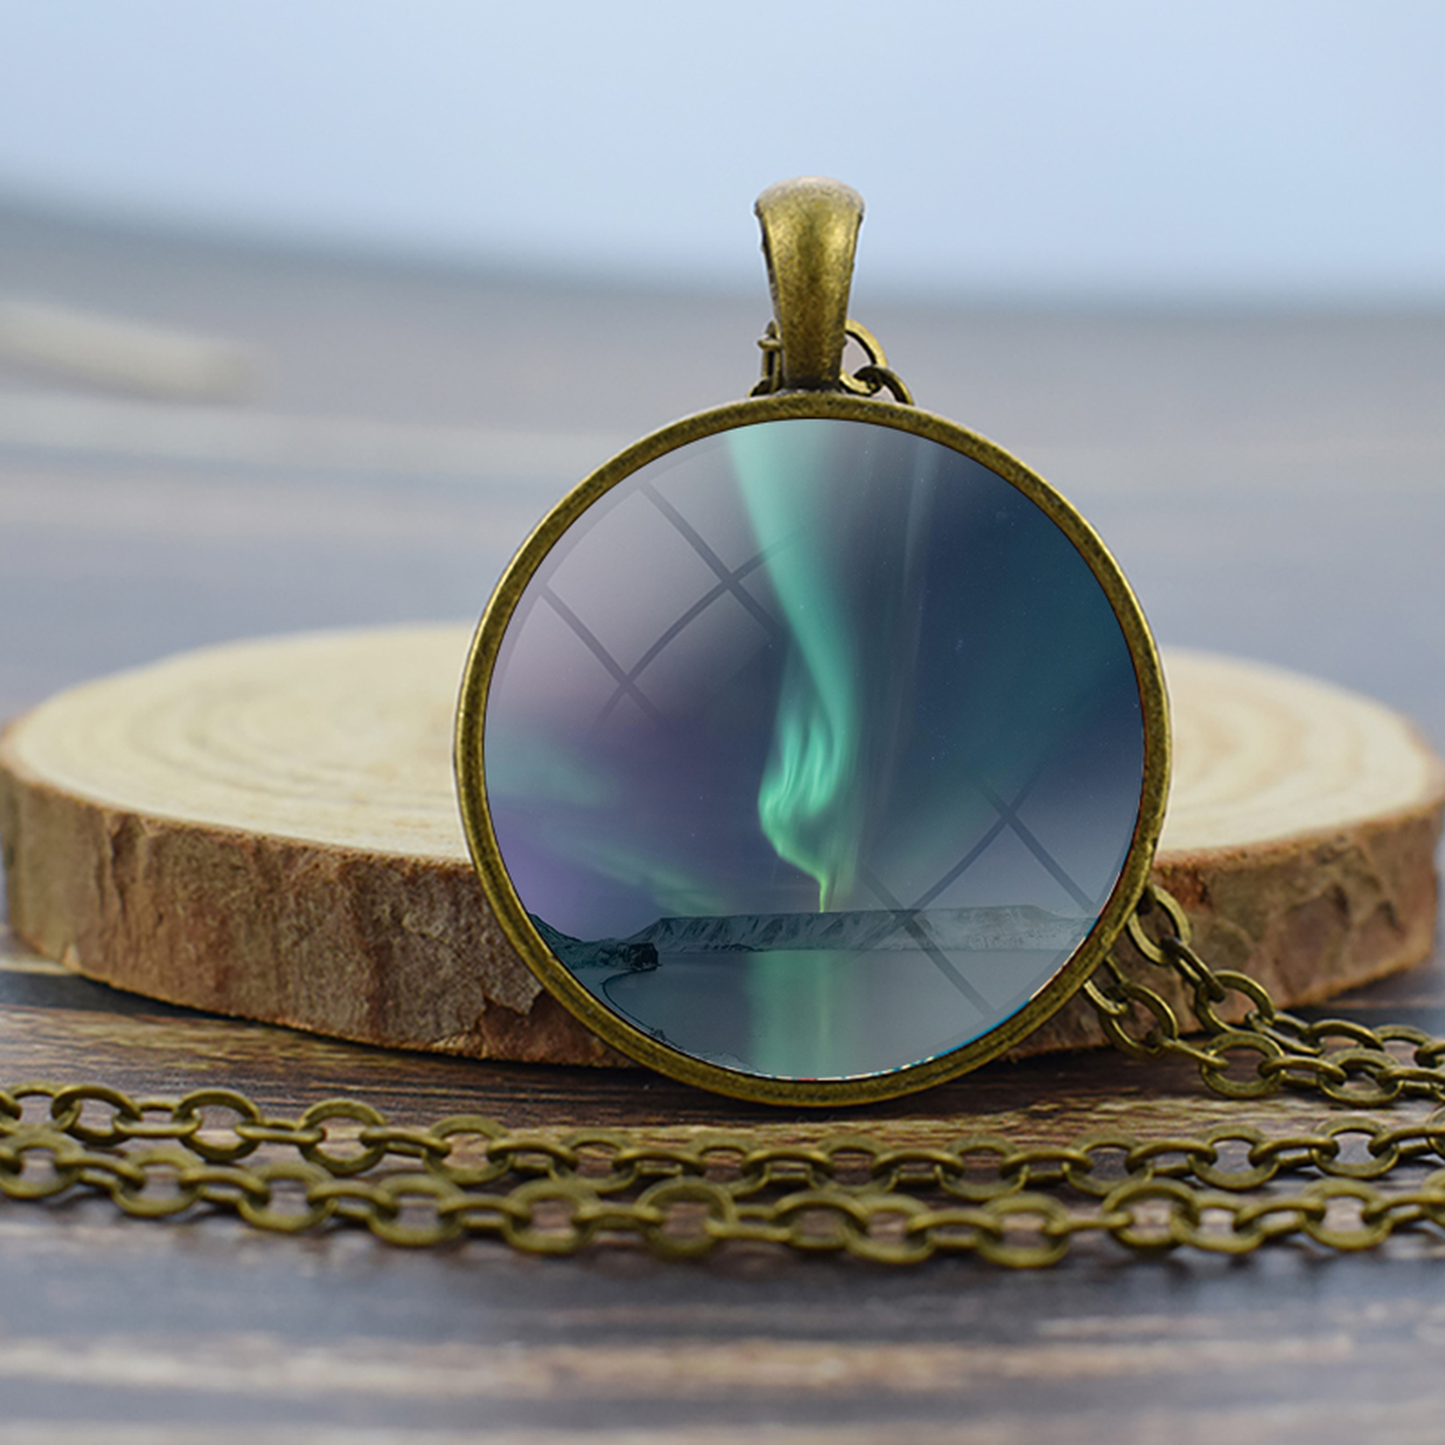 Unique Aurora Borealis Bronze Necklace - Northern Light Jewelry - Glass Dome Pendent Necklace - Perfect Aurora Lovers Gift 1